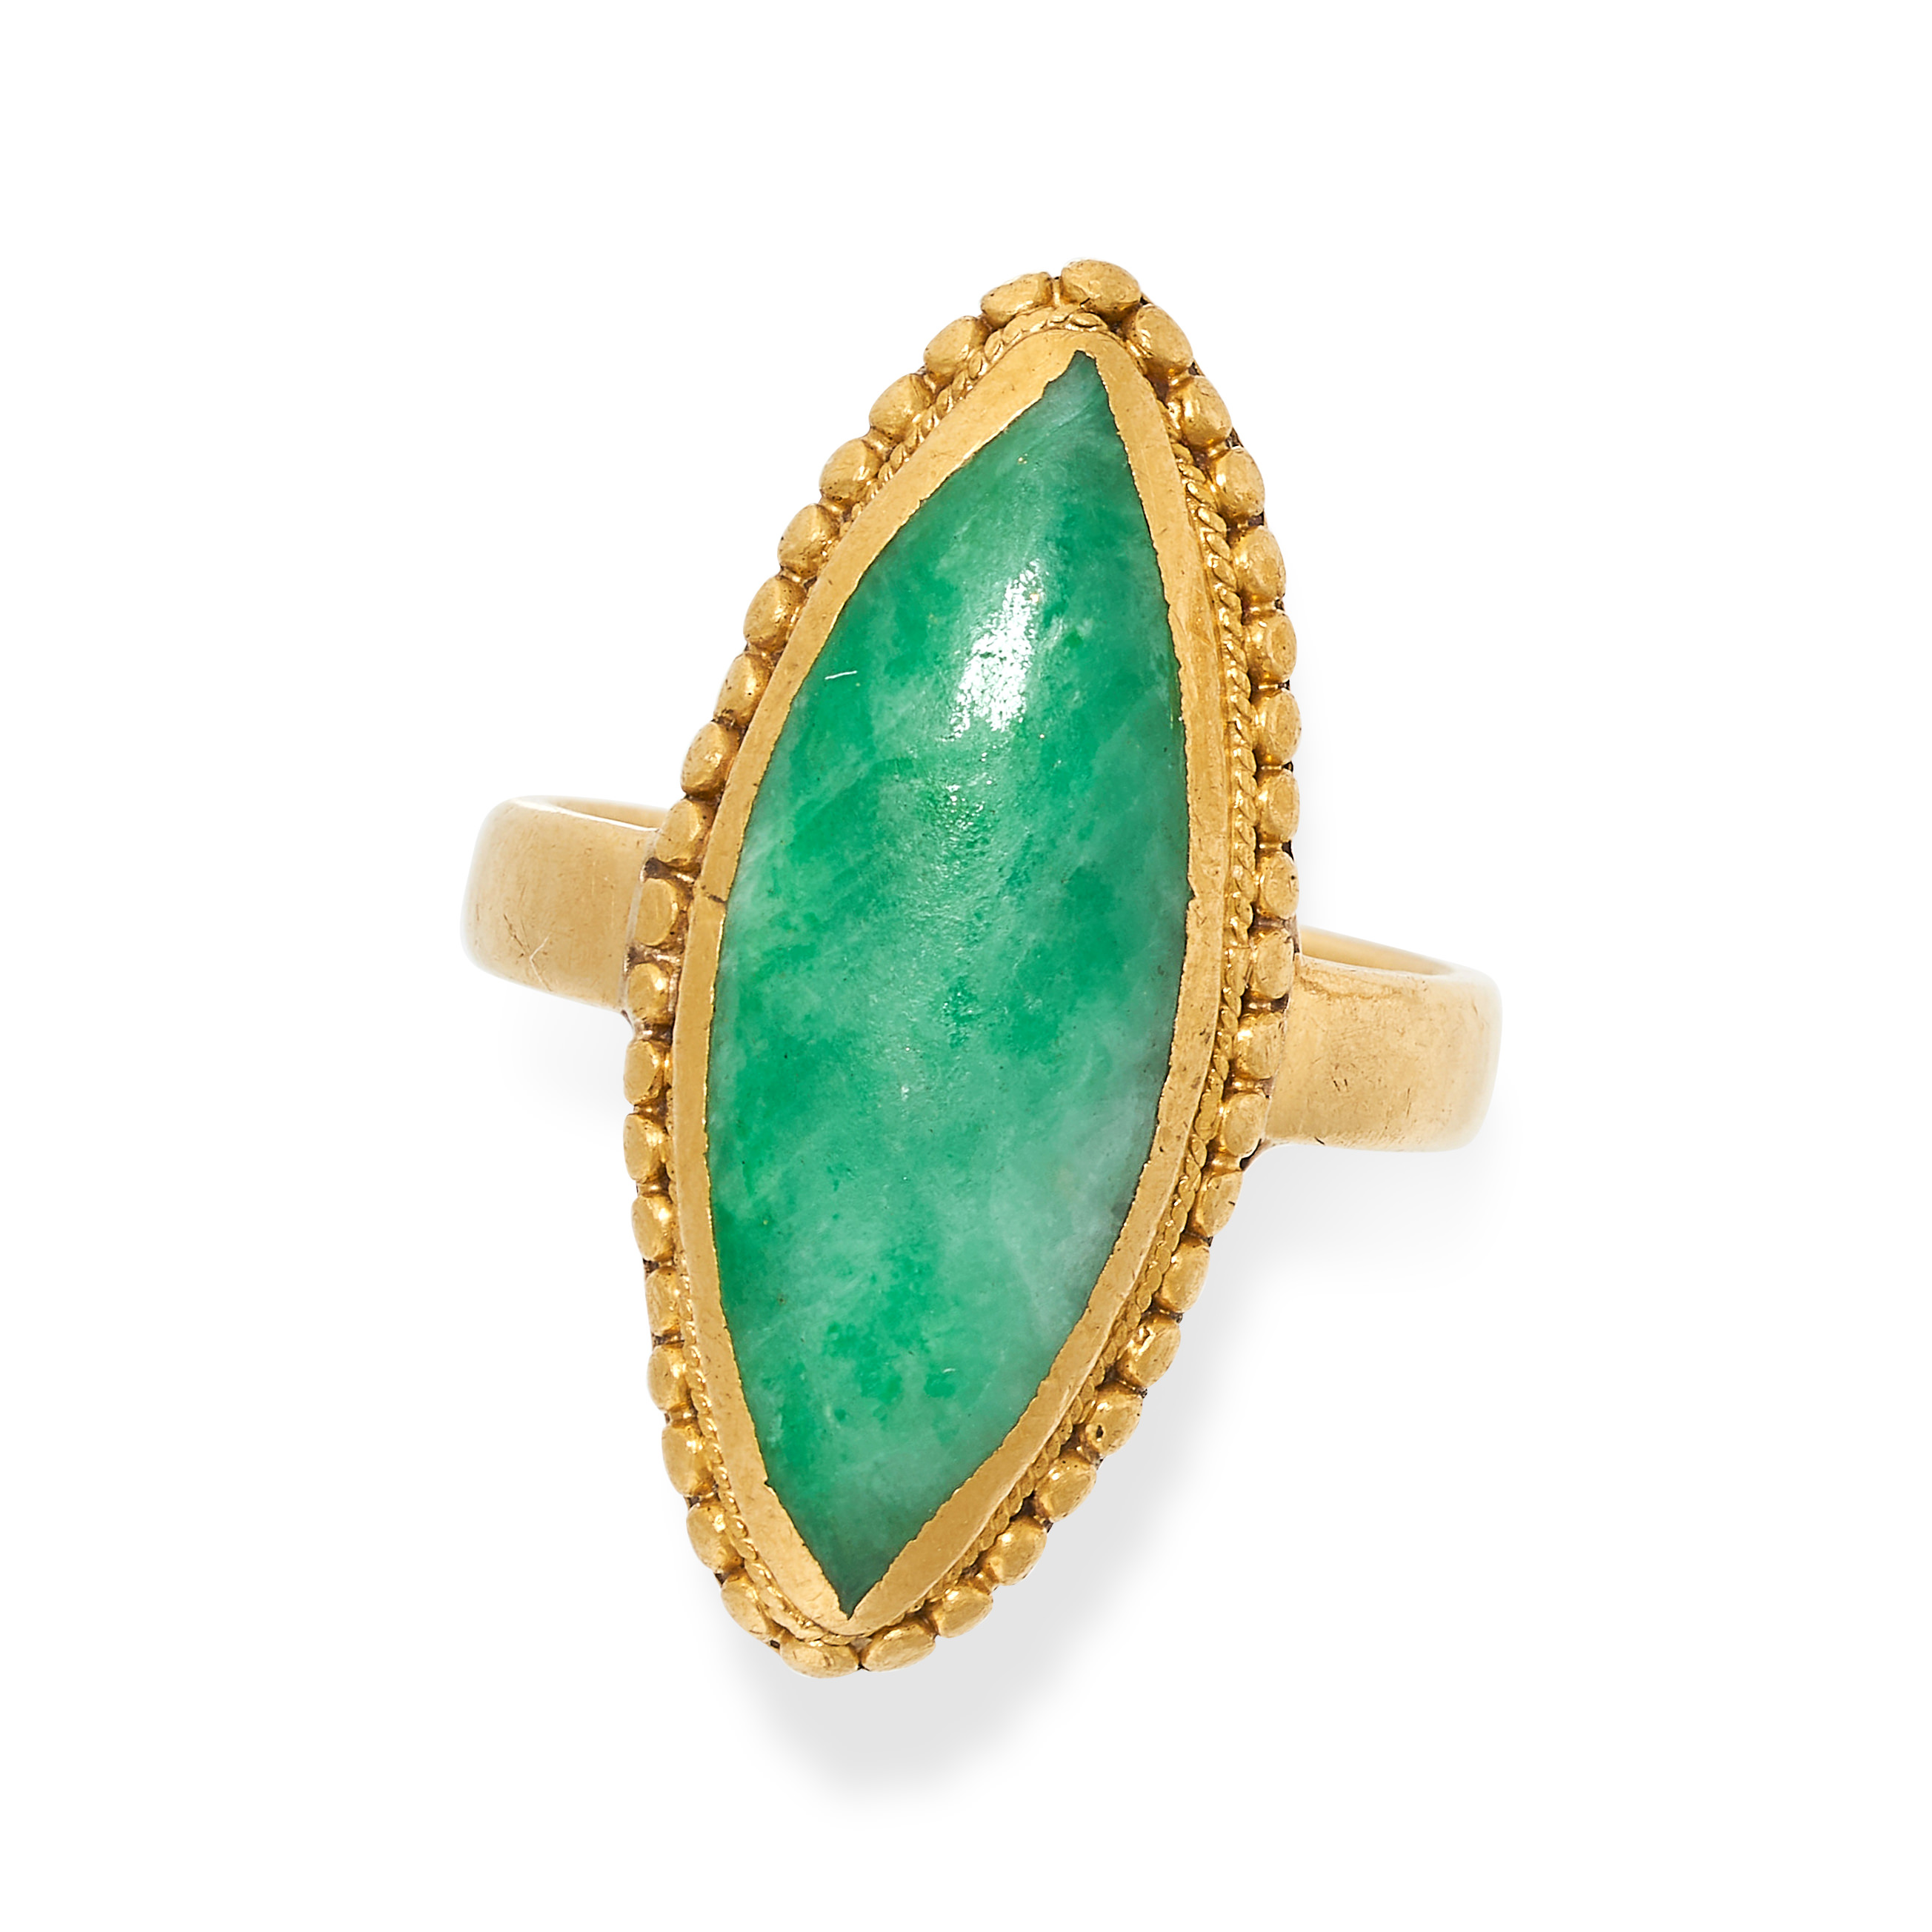 NO RESERVE - A CHINESE JADEITE JADE RING in 24ct yellow gold, set with a marquise shaped cabochon